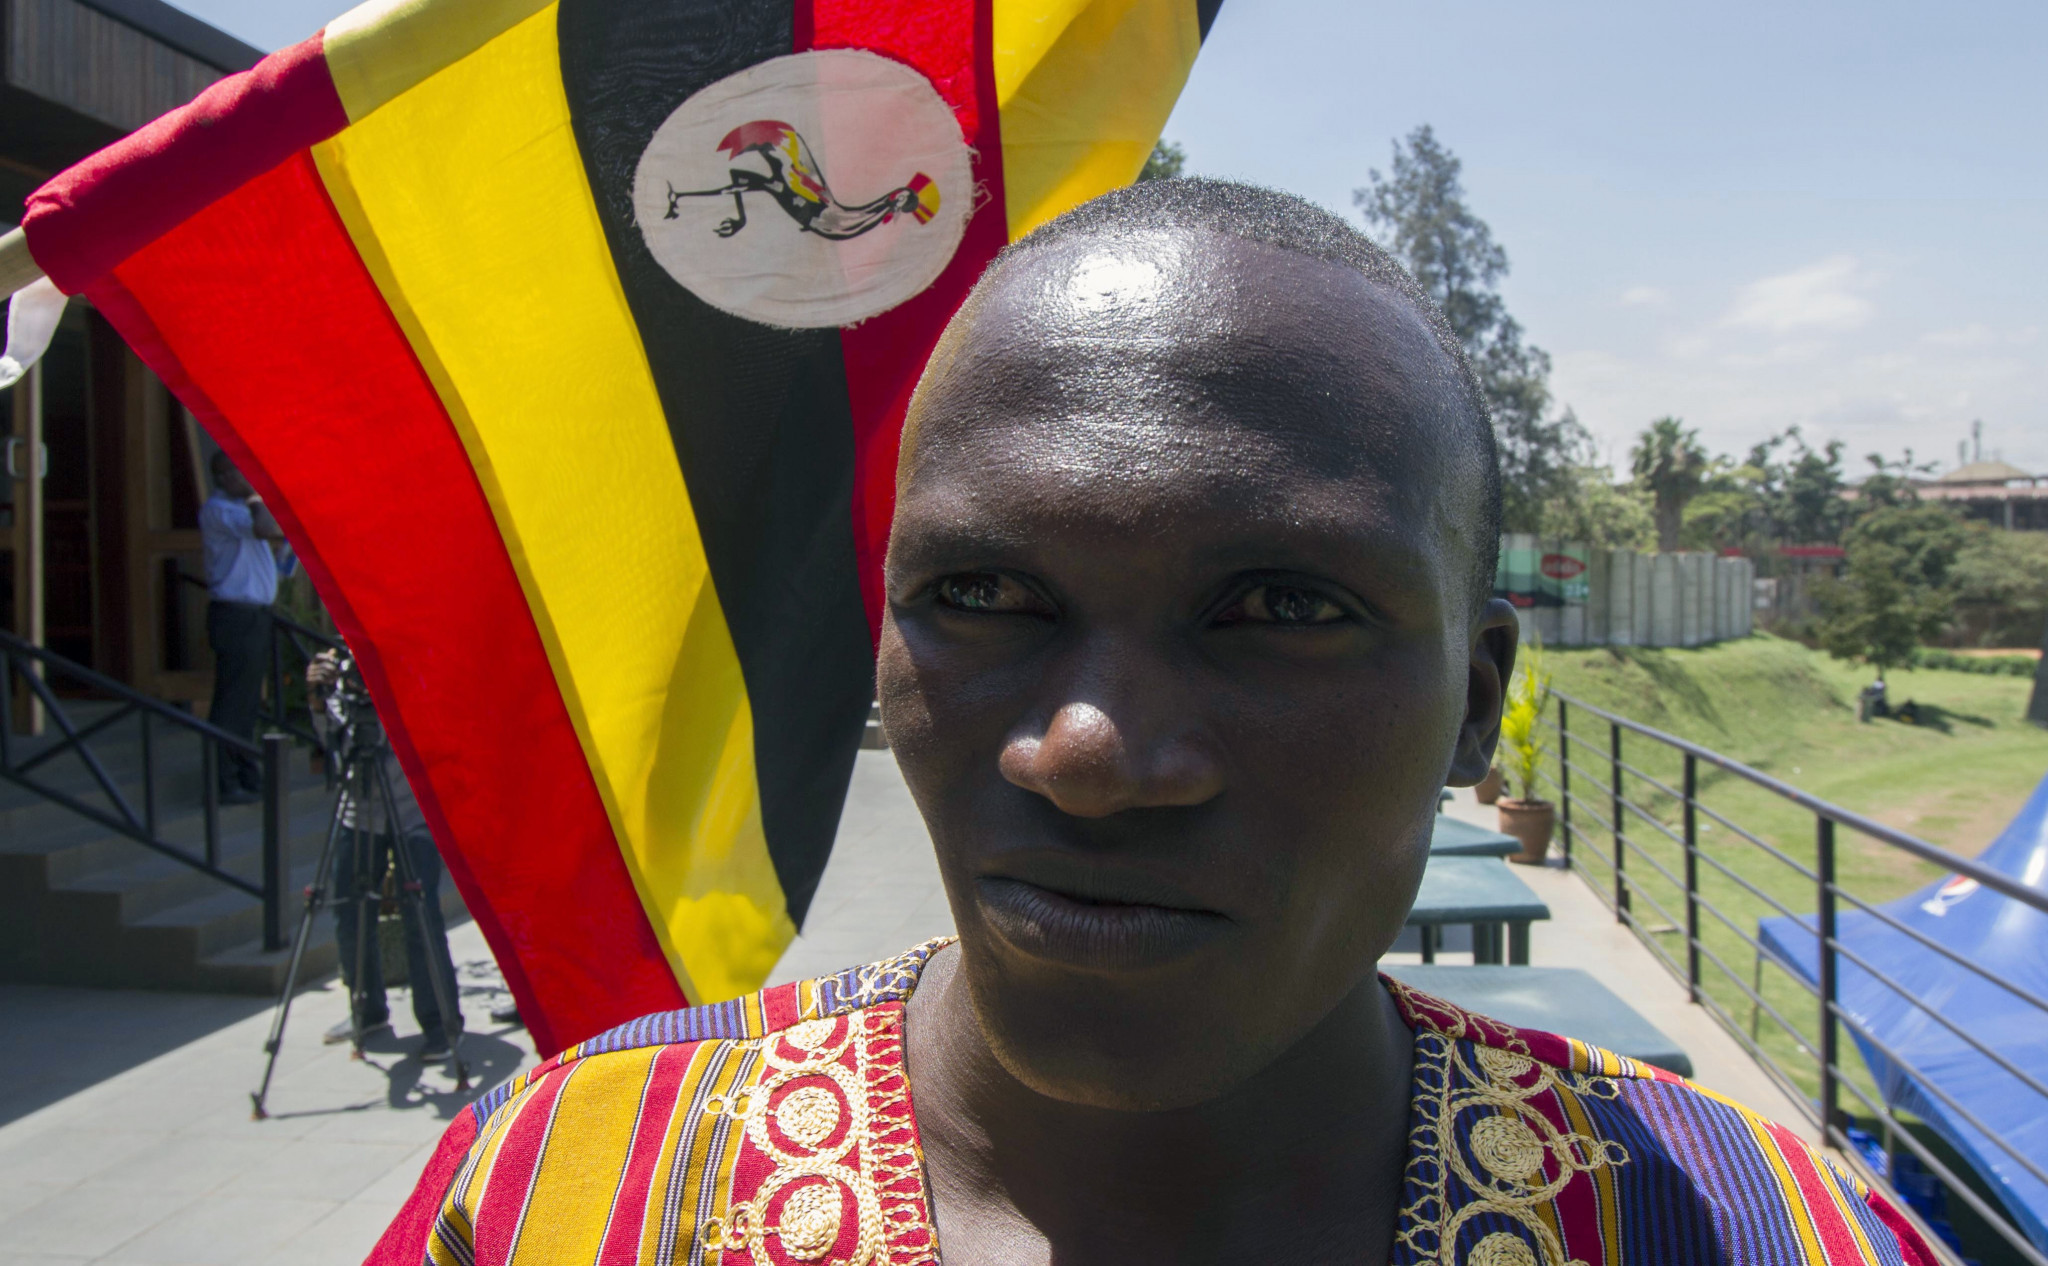 Stephen Kiprotich will not appear at Gold Coast 2018 ©Getty Images